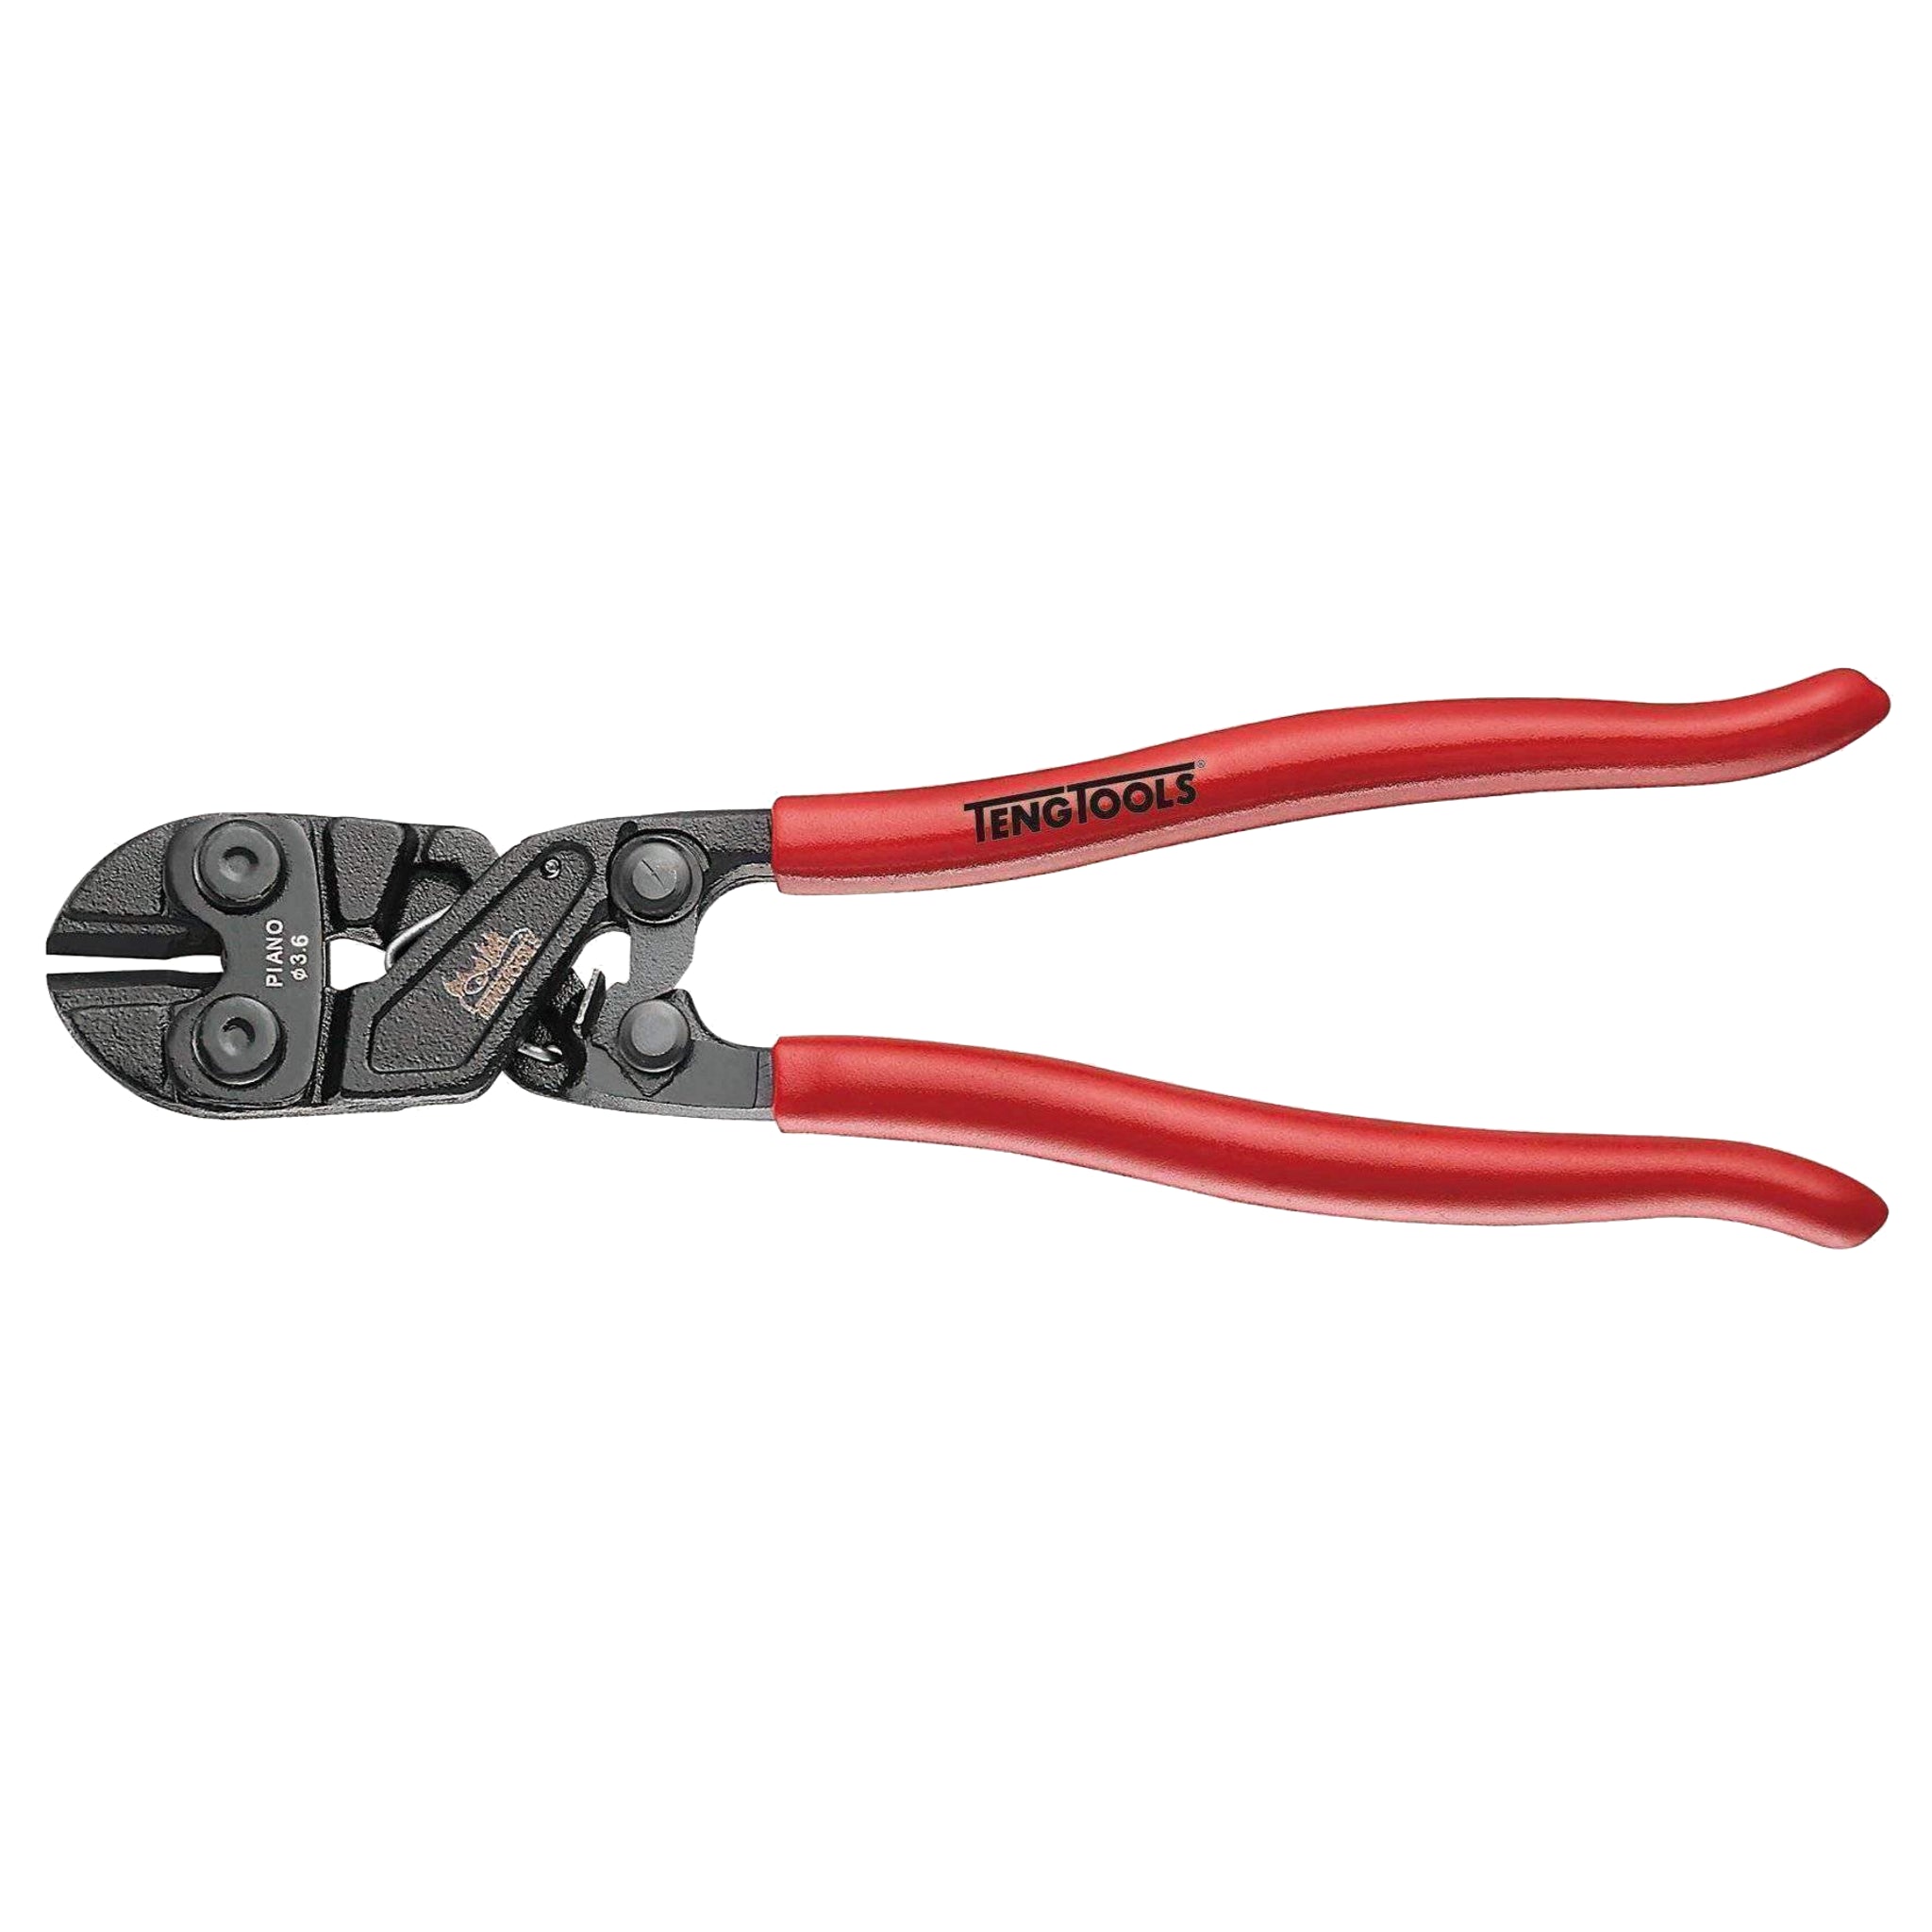 Teng Tools Bolt Cutters With Dipped Handle 8 To 36 Inches - 14 Inch